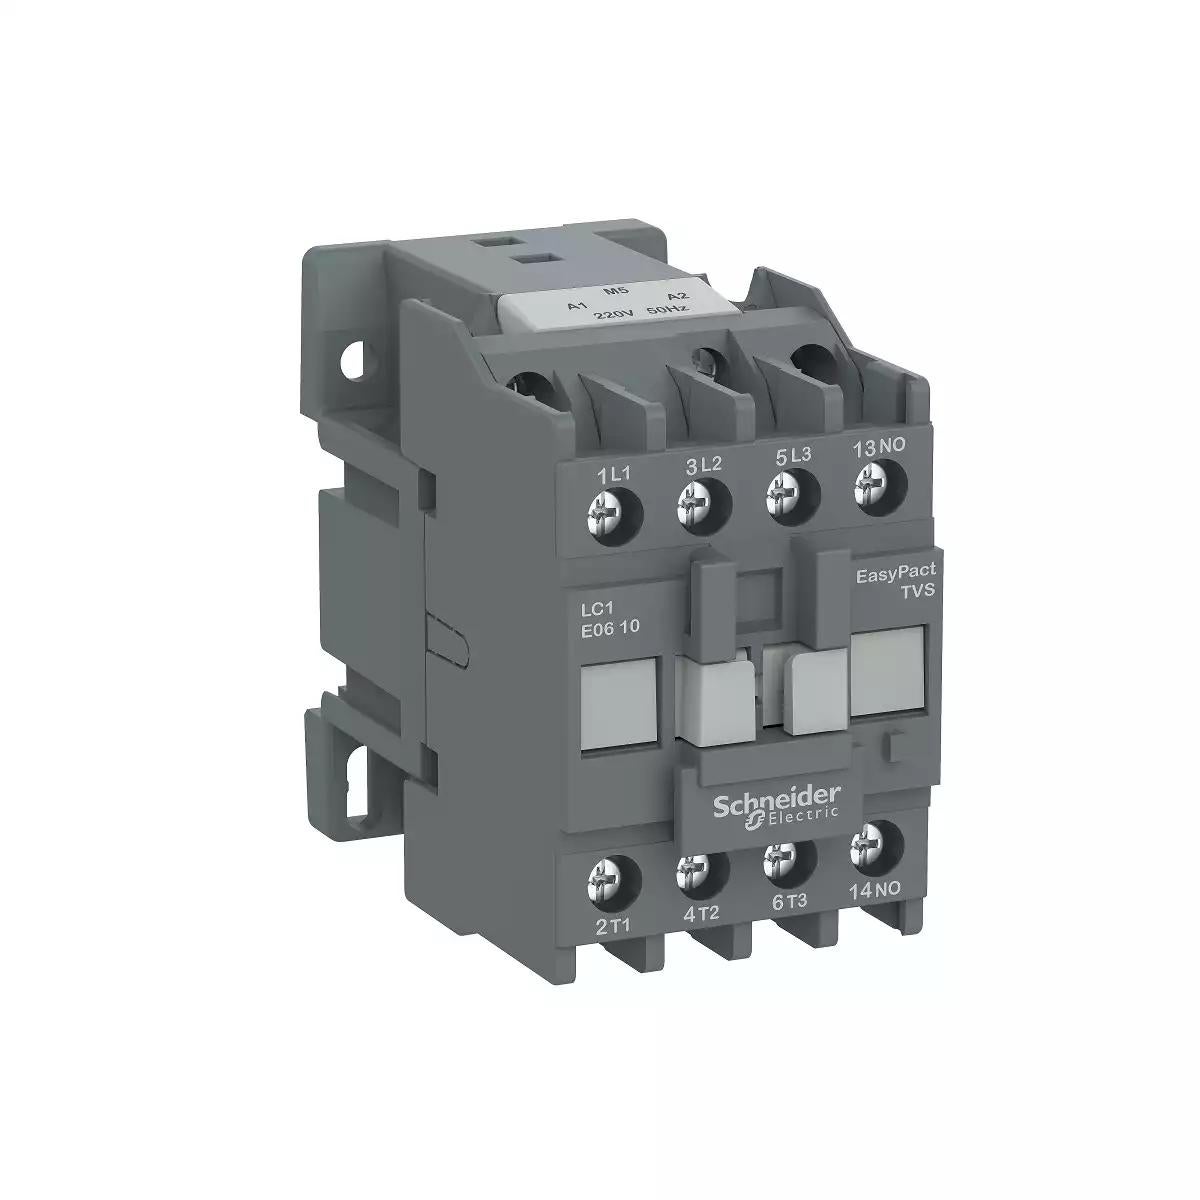 Contactor,EasyPact TVS,3P(3NO),AC-3,<lt/>=440V,9A,220V AC coil,50Hz,1NC auxiliary contact